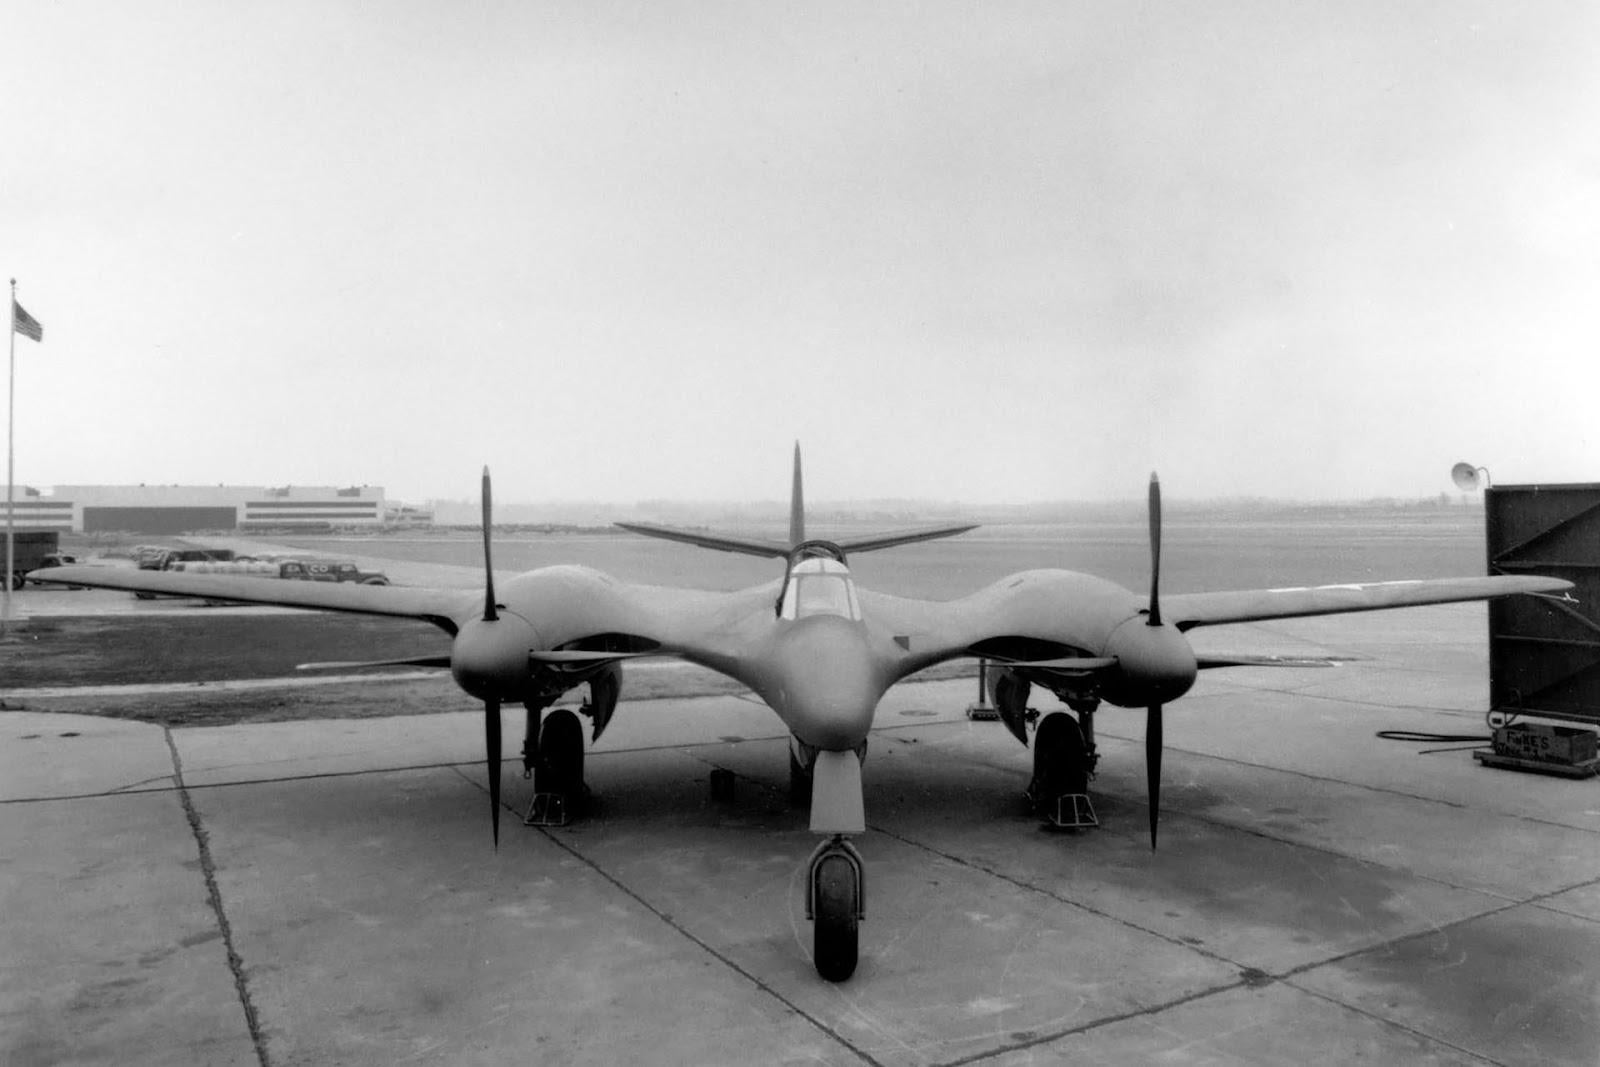 McDonnell’s ‘Moonbat’ Definitely Stood Out in the Early 1940s